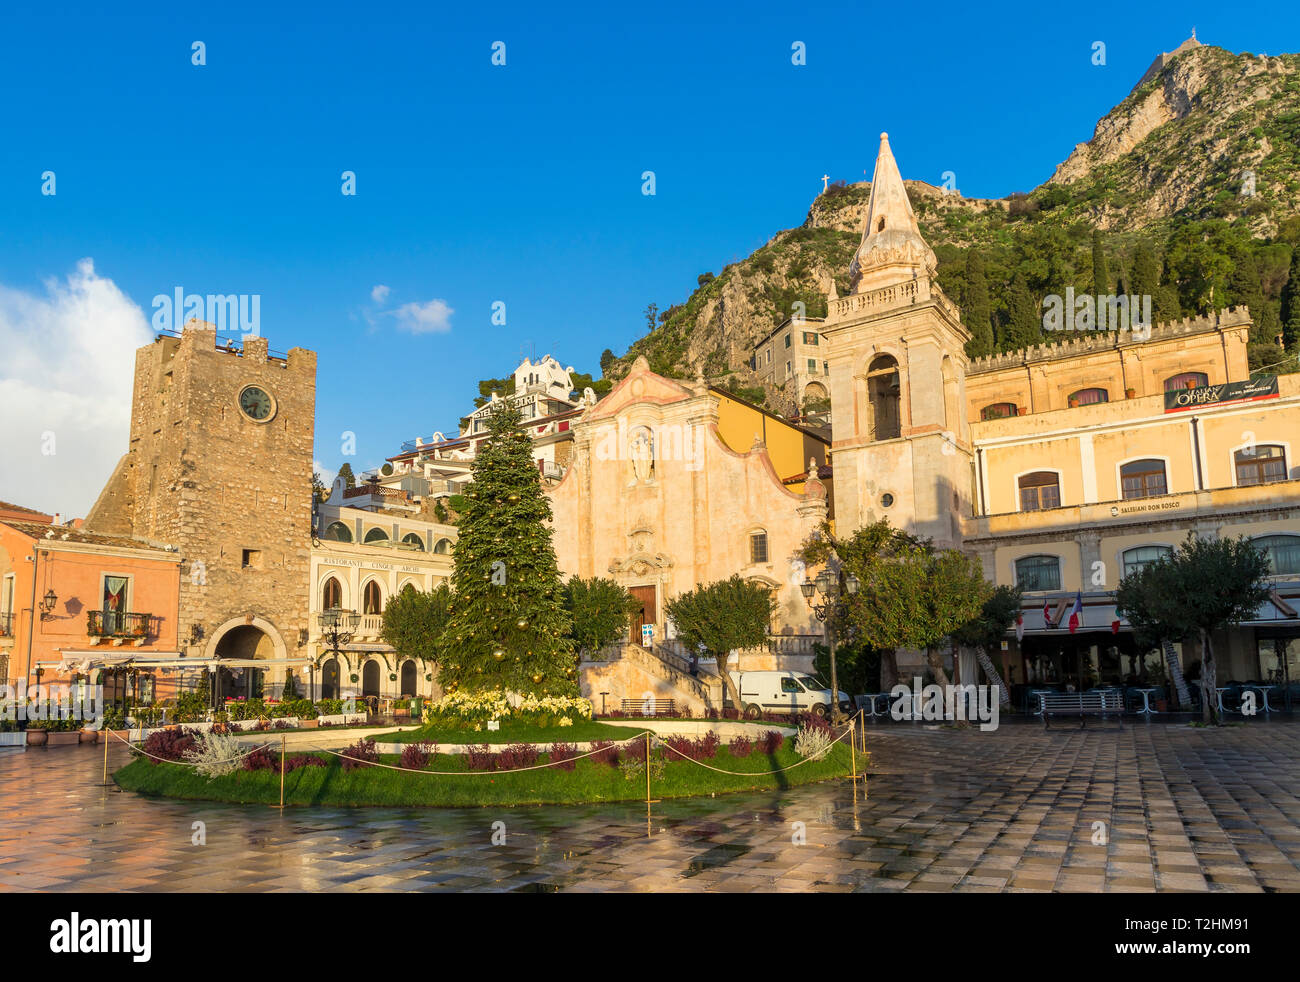 San Guiseppe church and the clock tower gate at Piazza IX Aprile, Taormina, Sicily, Italy, Europe Stock Photo